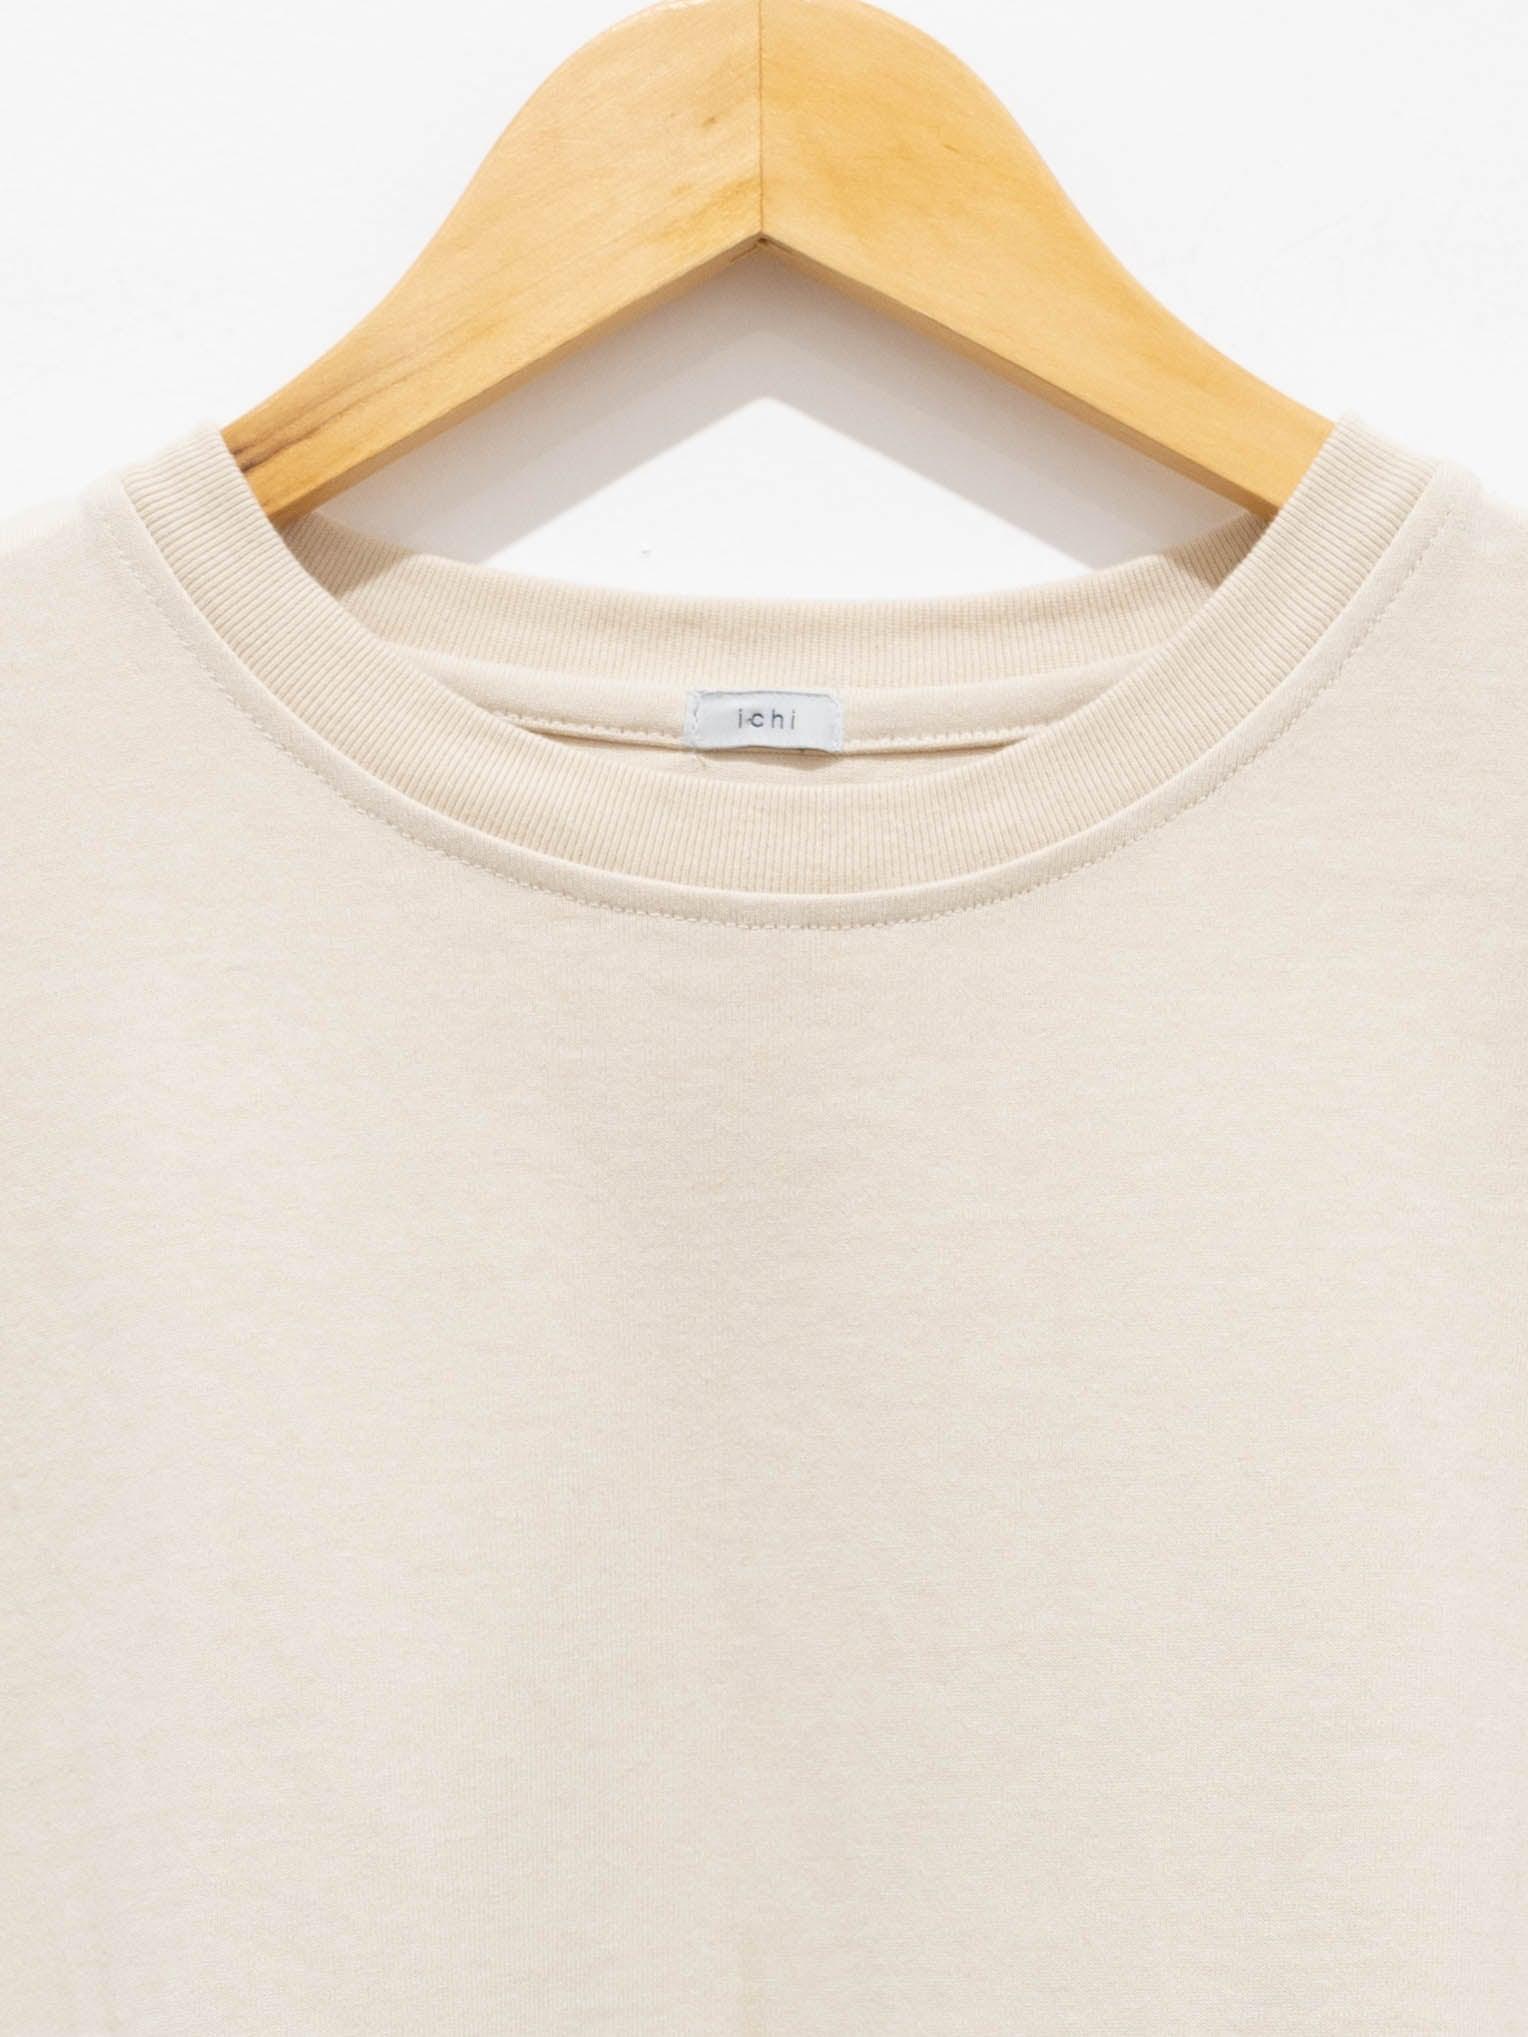 Namu Shop - Ichi Antiquites Relaxed Pullover Top - Ivory